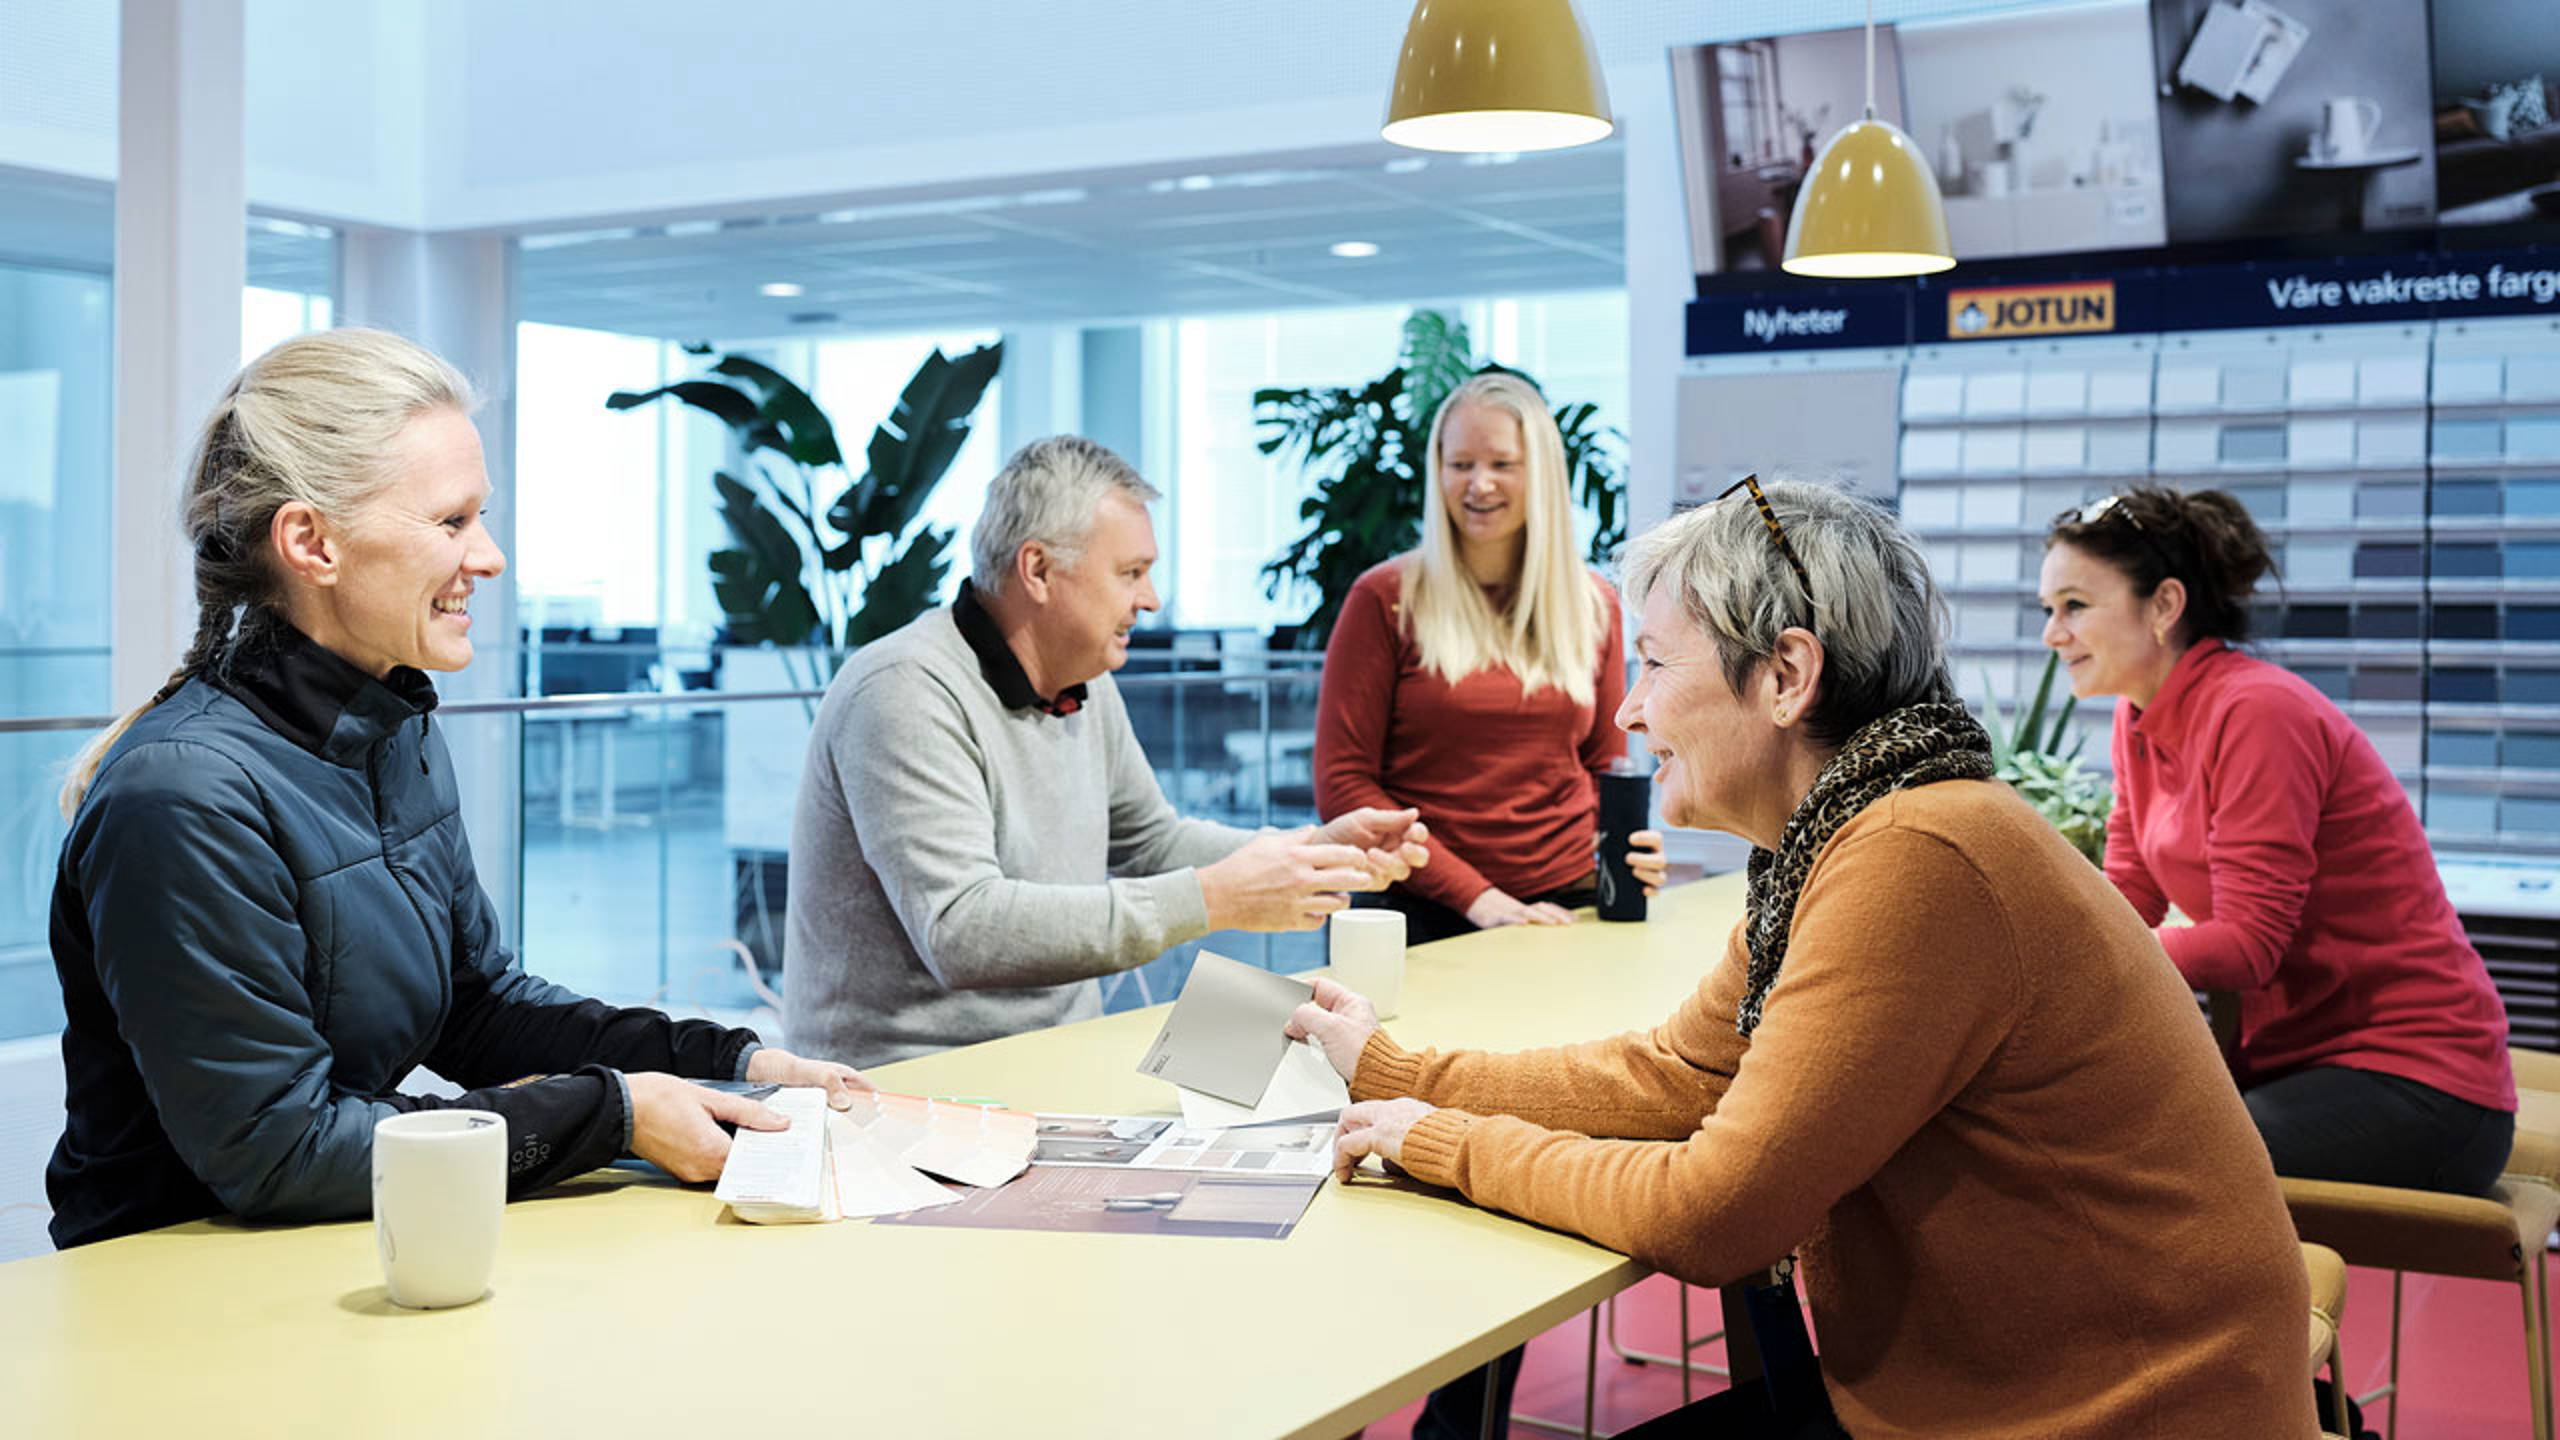 Colleagues in Colour Technology Laboratory having a meeting in the social zone. Photo: Jotun/Morten Rakke.